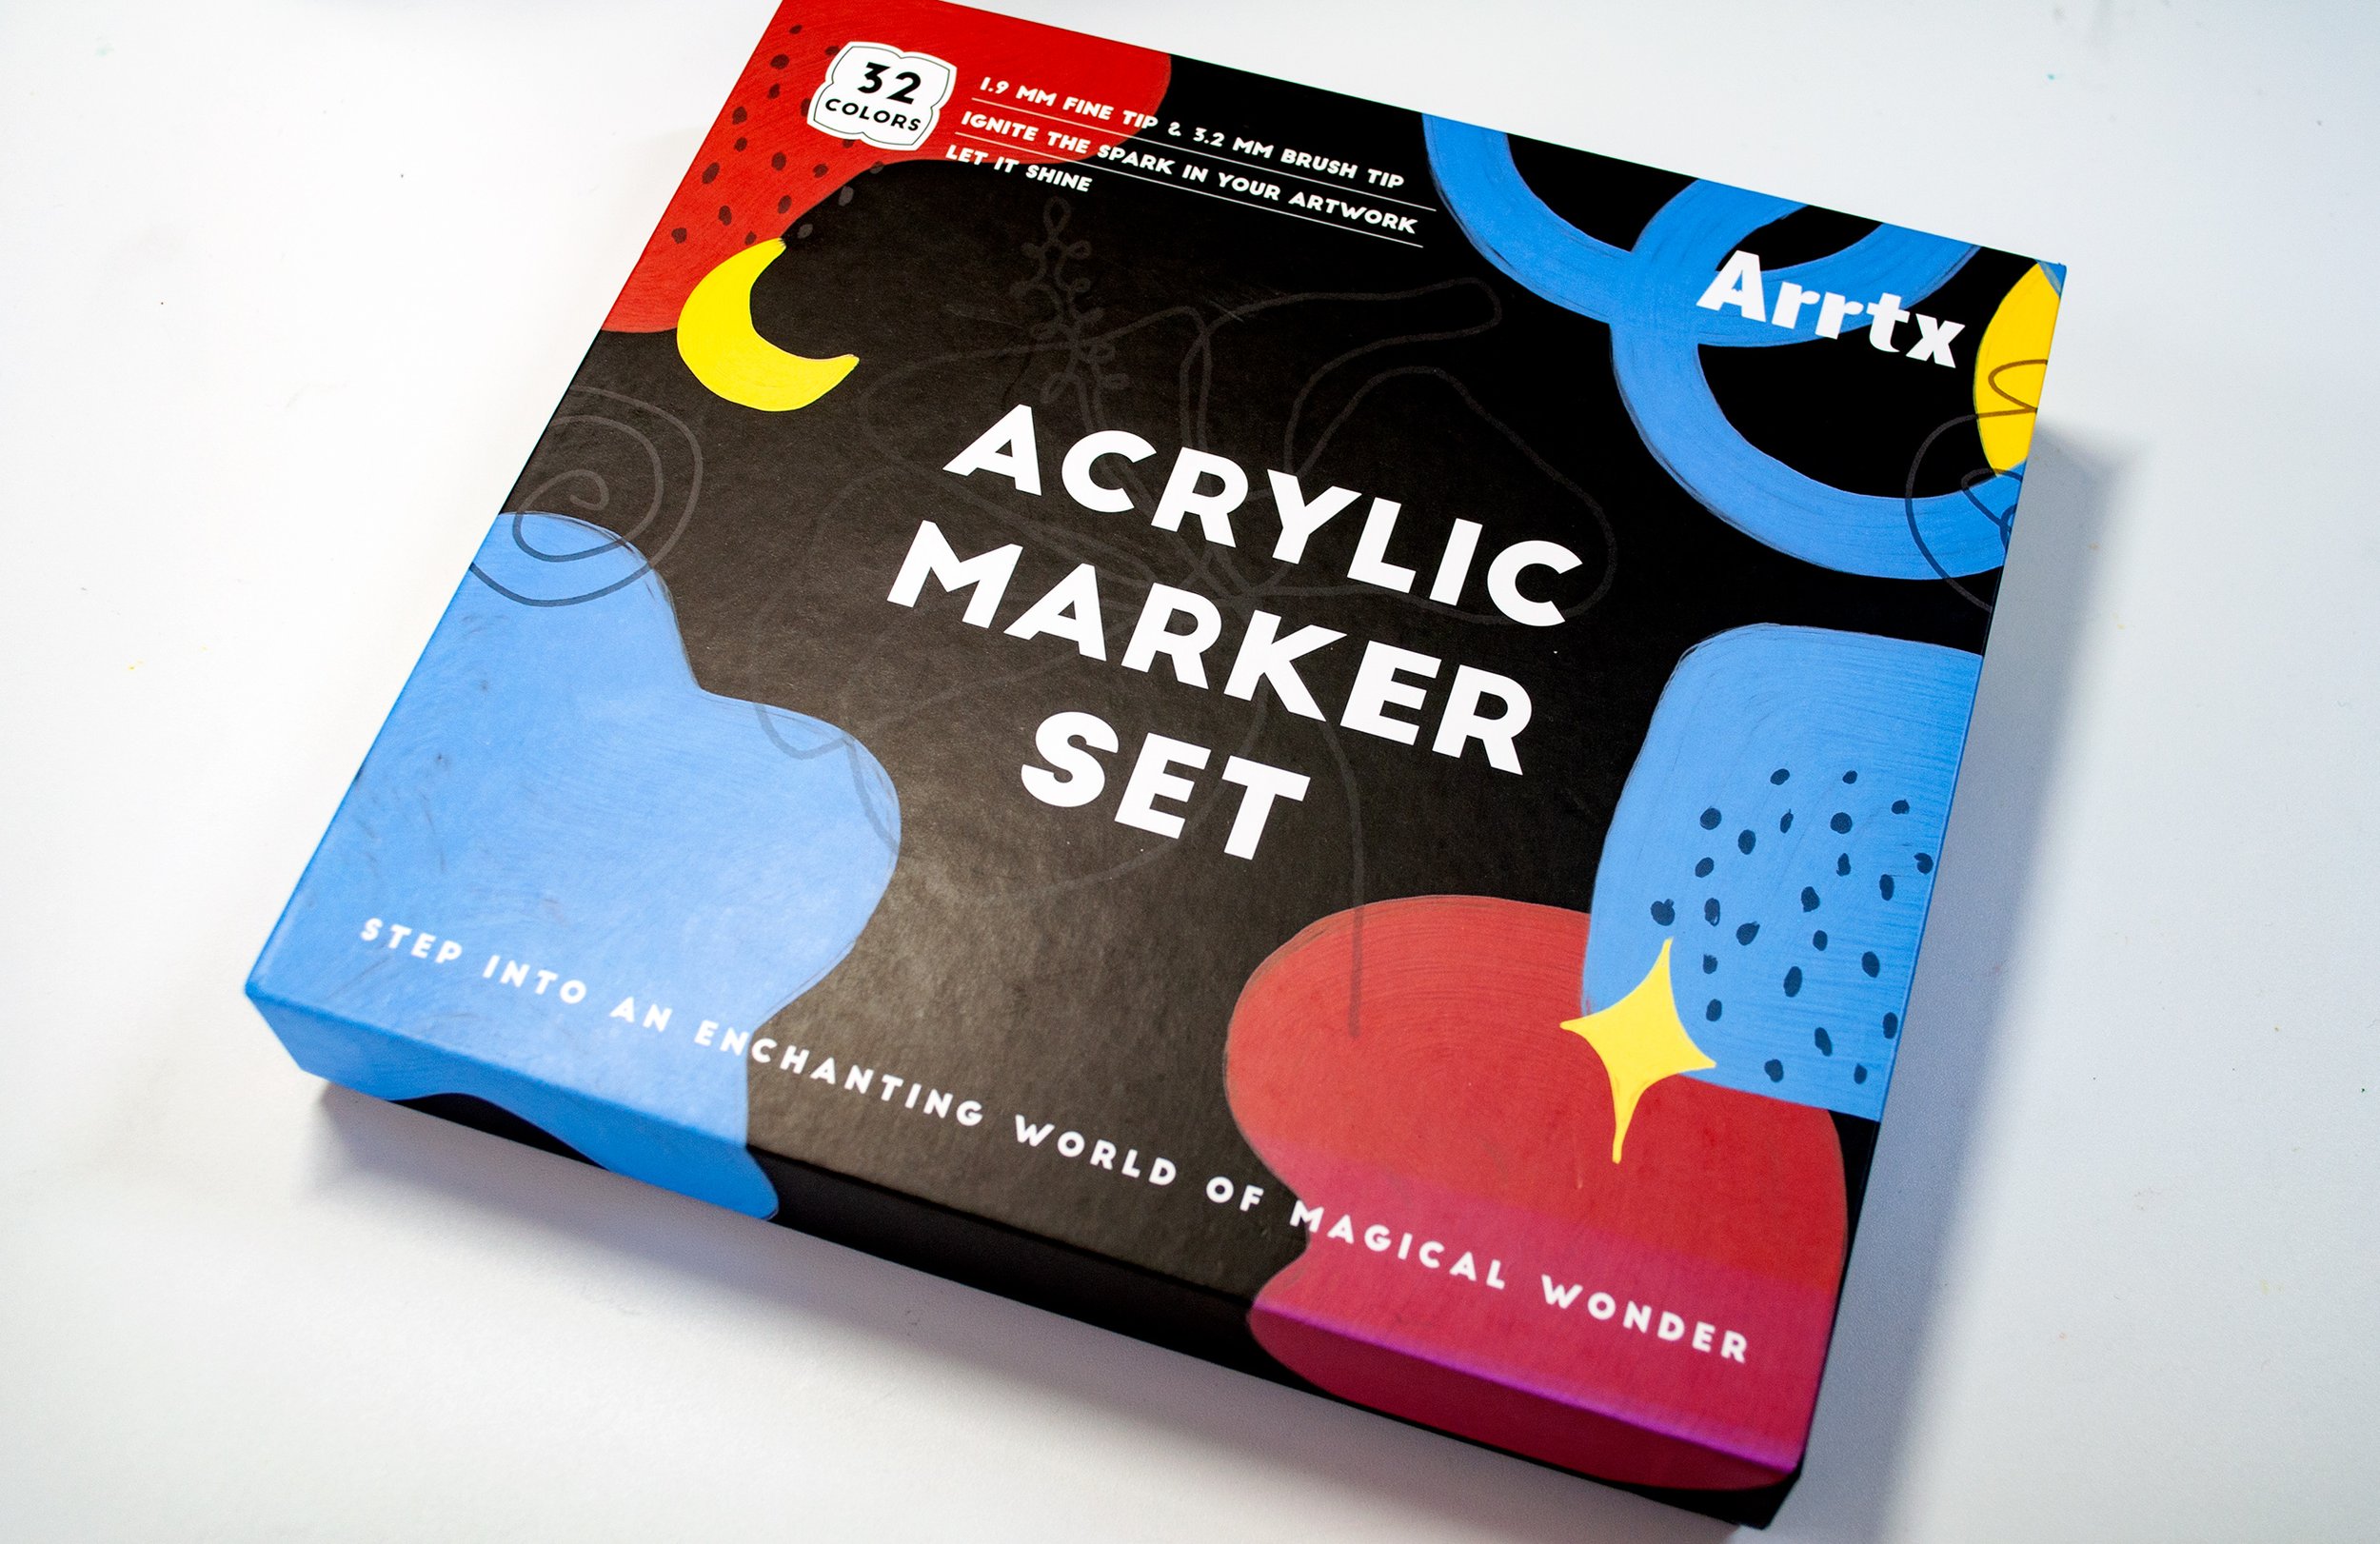 painting with acrylic markers! 🍊🎨 arrtx acrylic markers review